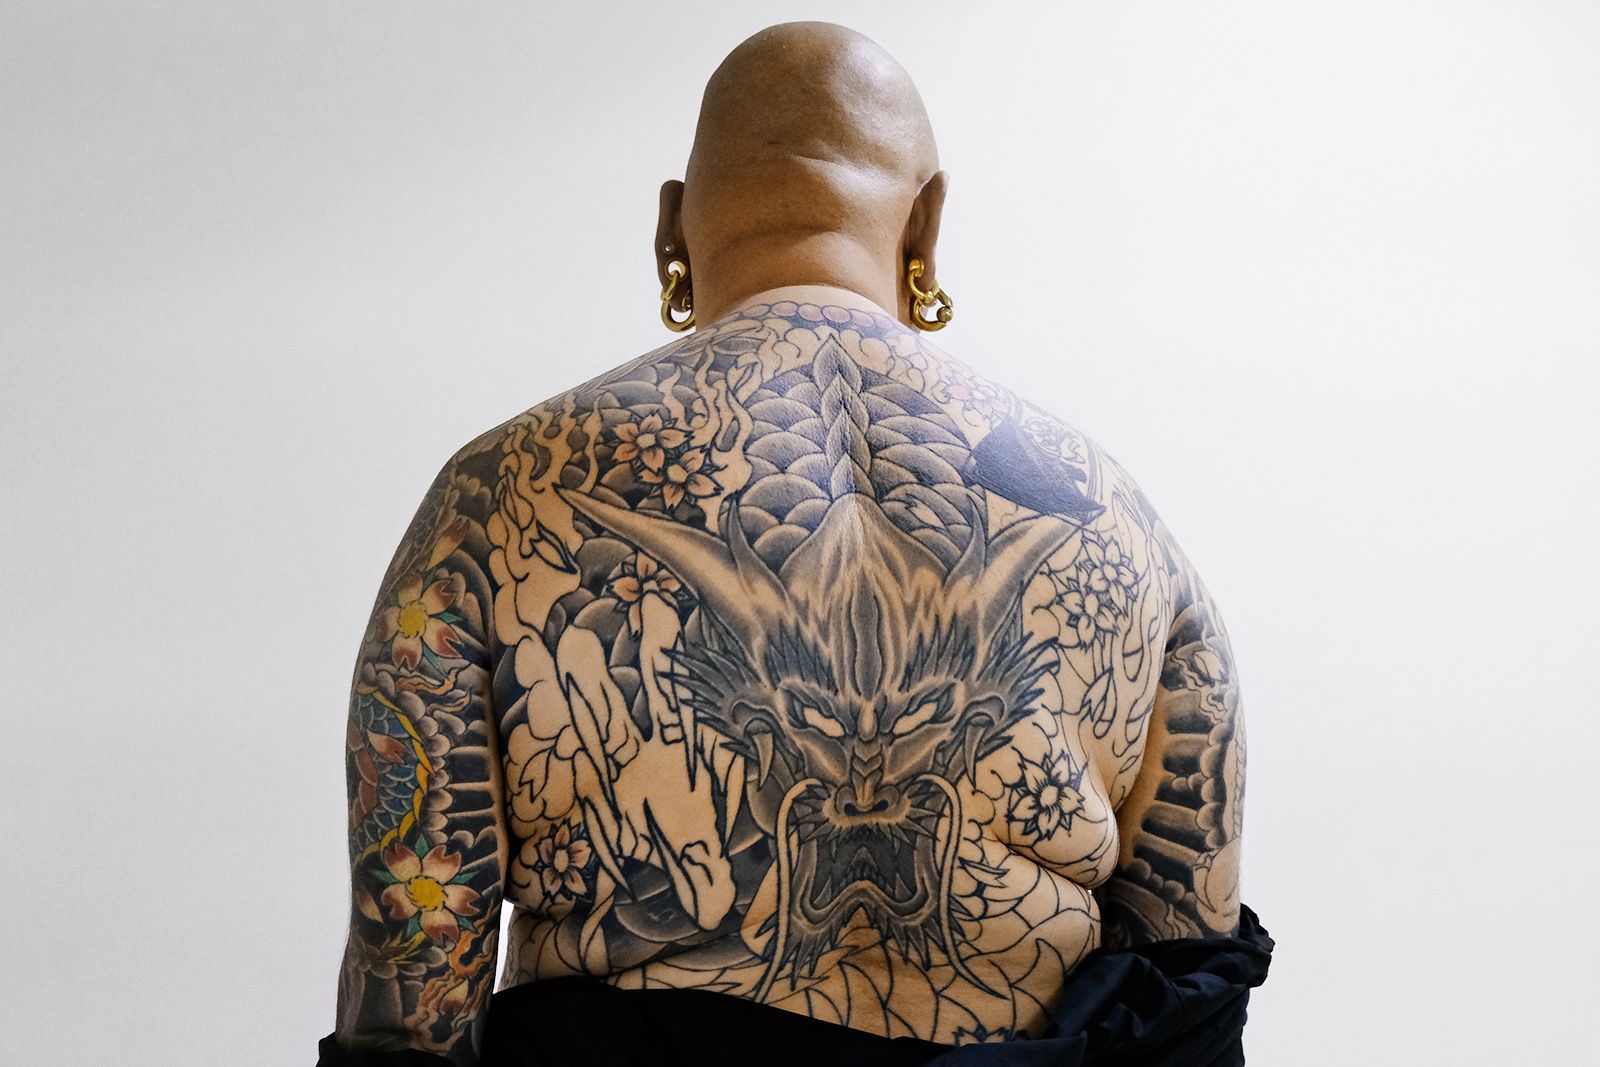 Up close and personal with the women of the Yakuza